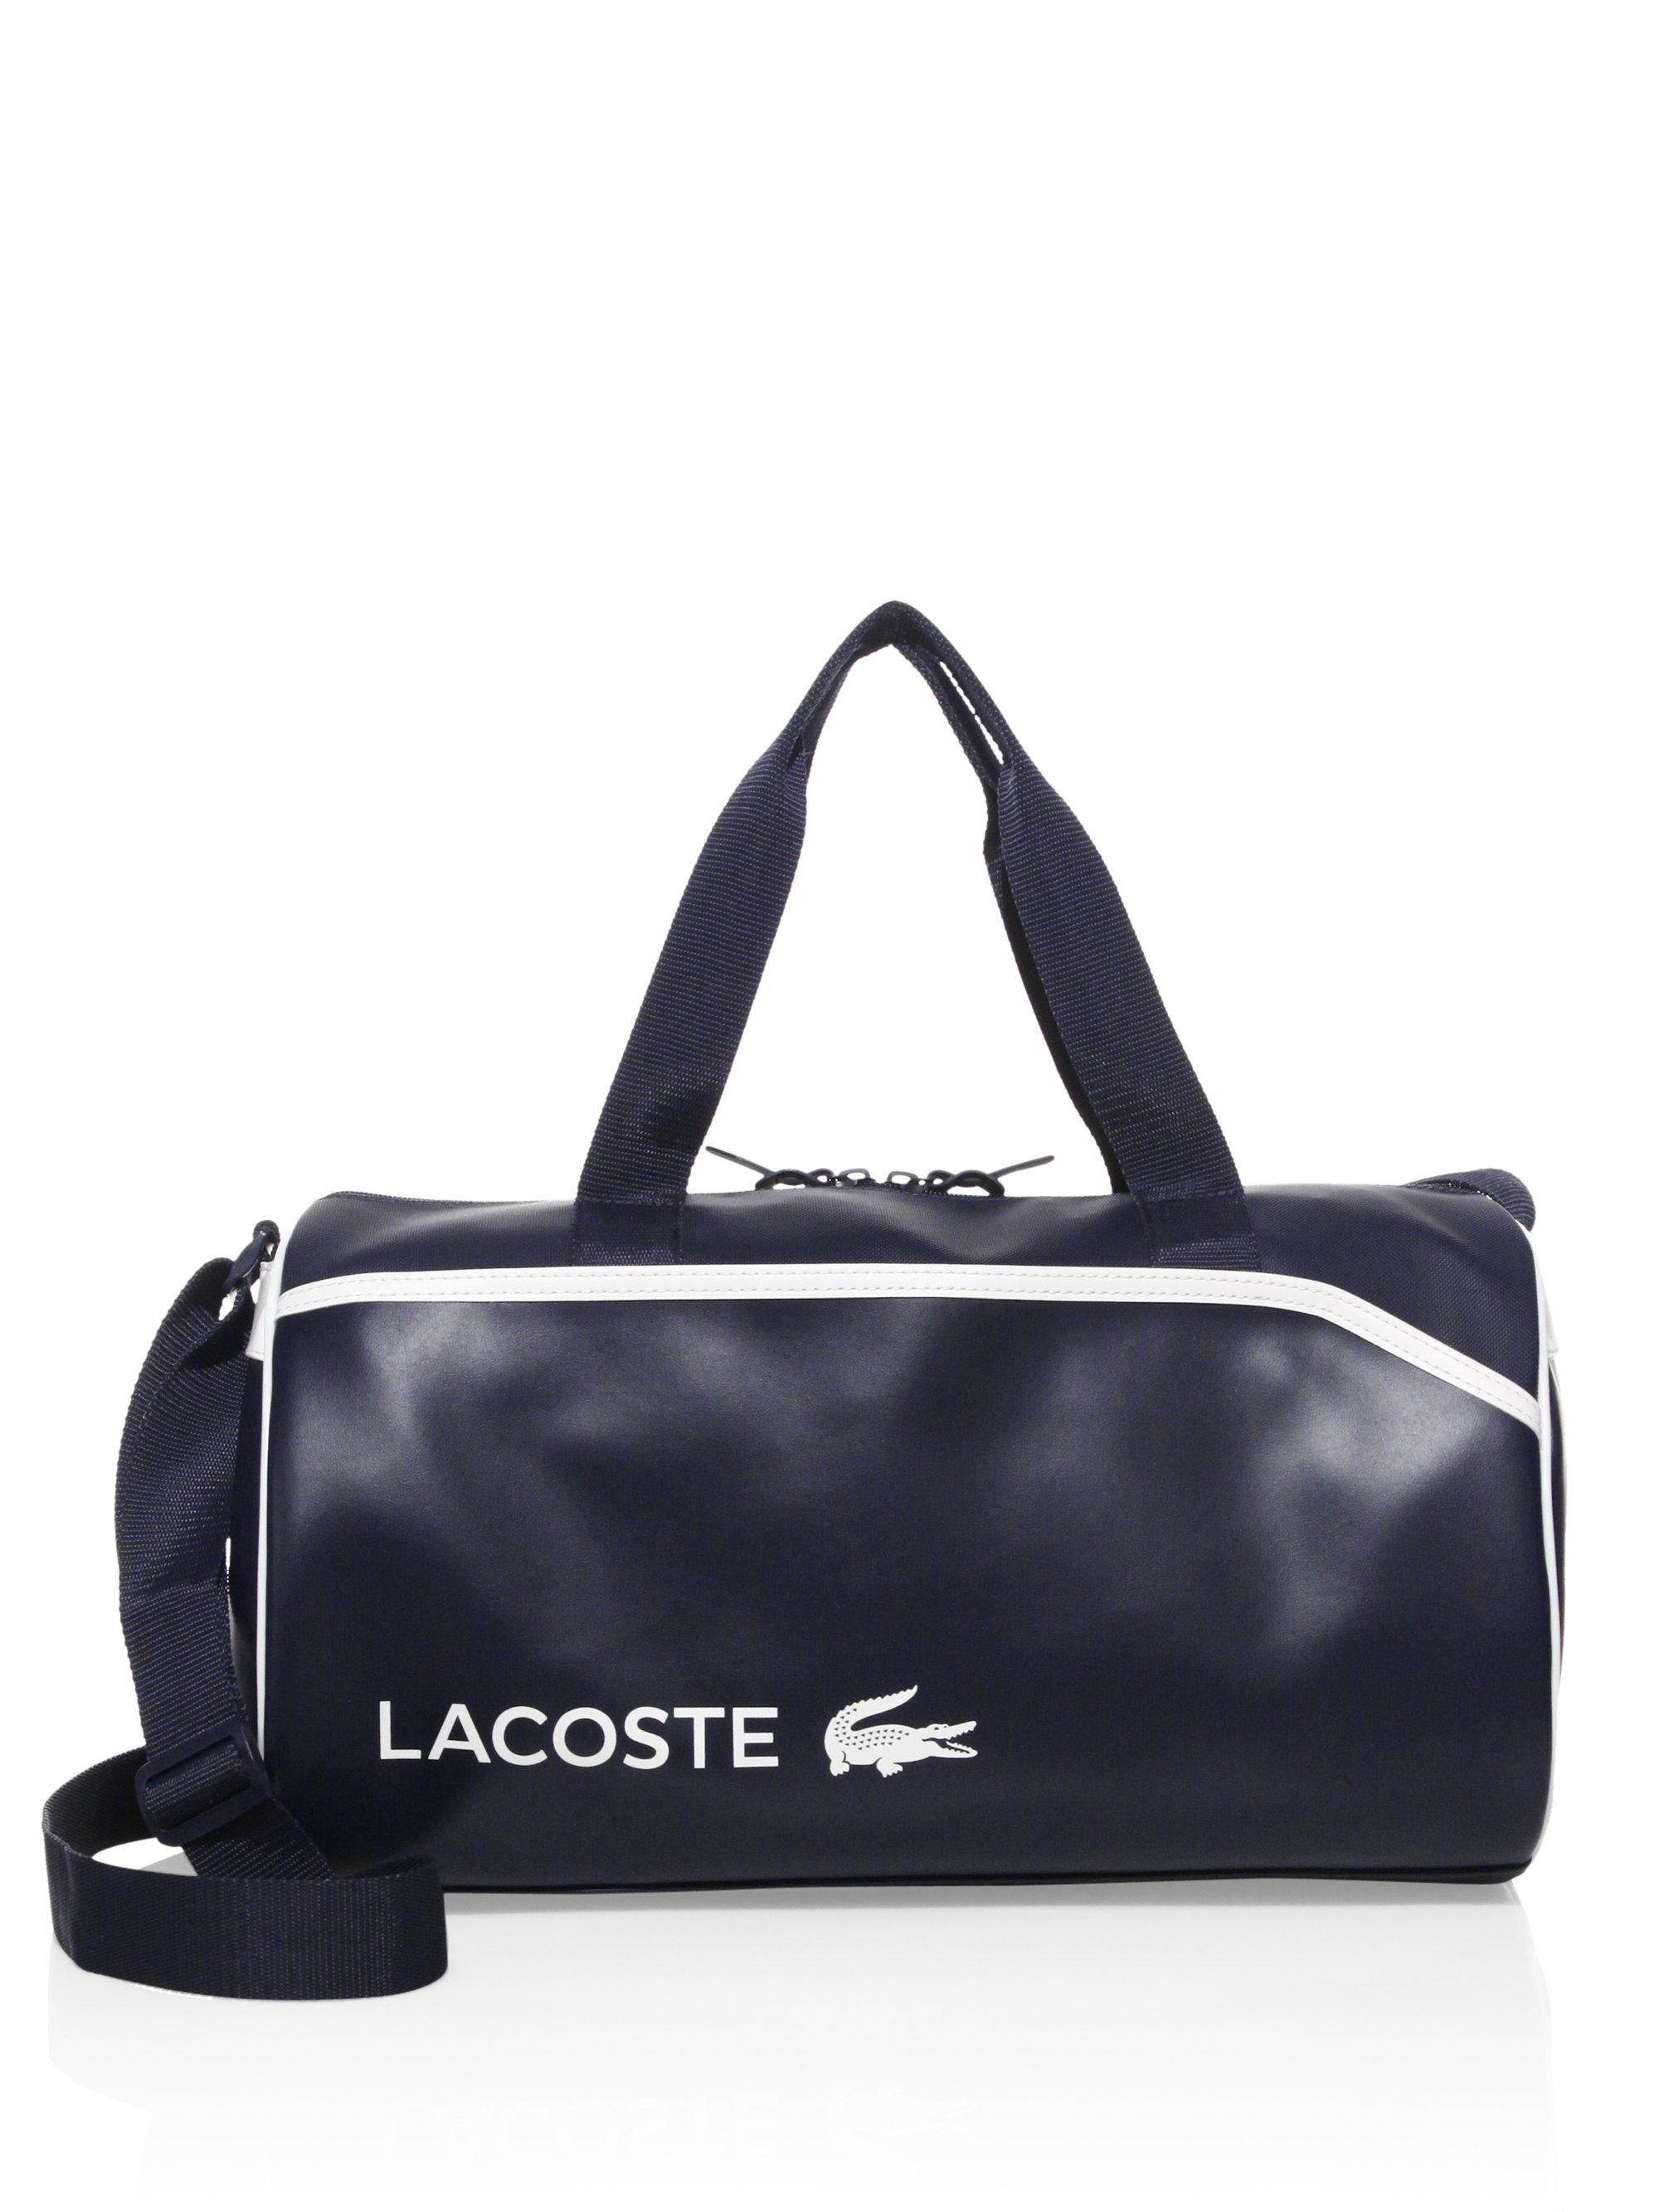 Lacoste Colorblock Duffle Bag in Blue for Men - Lyst